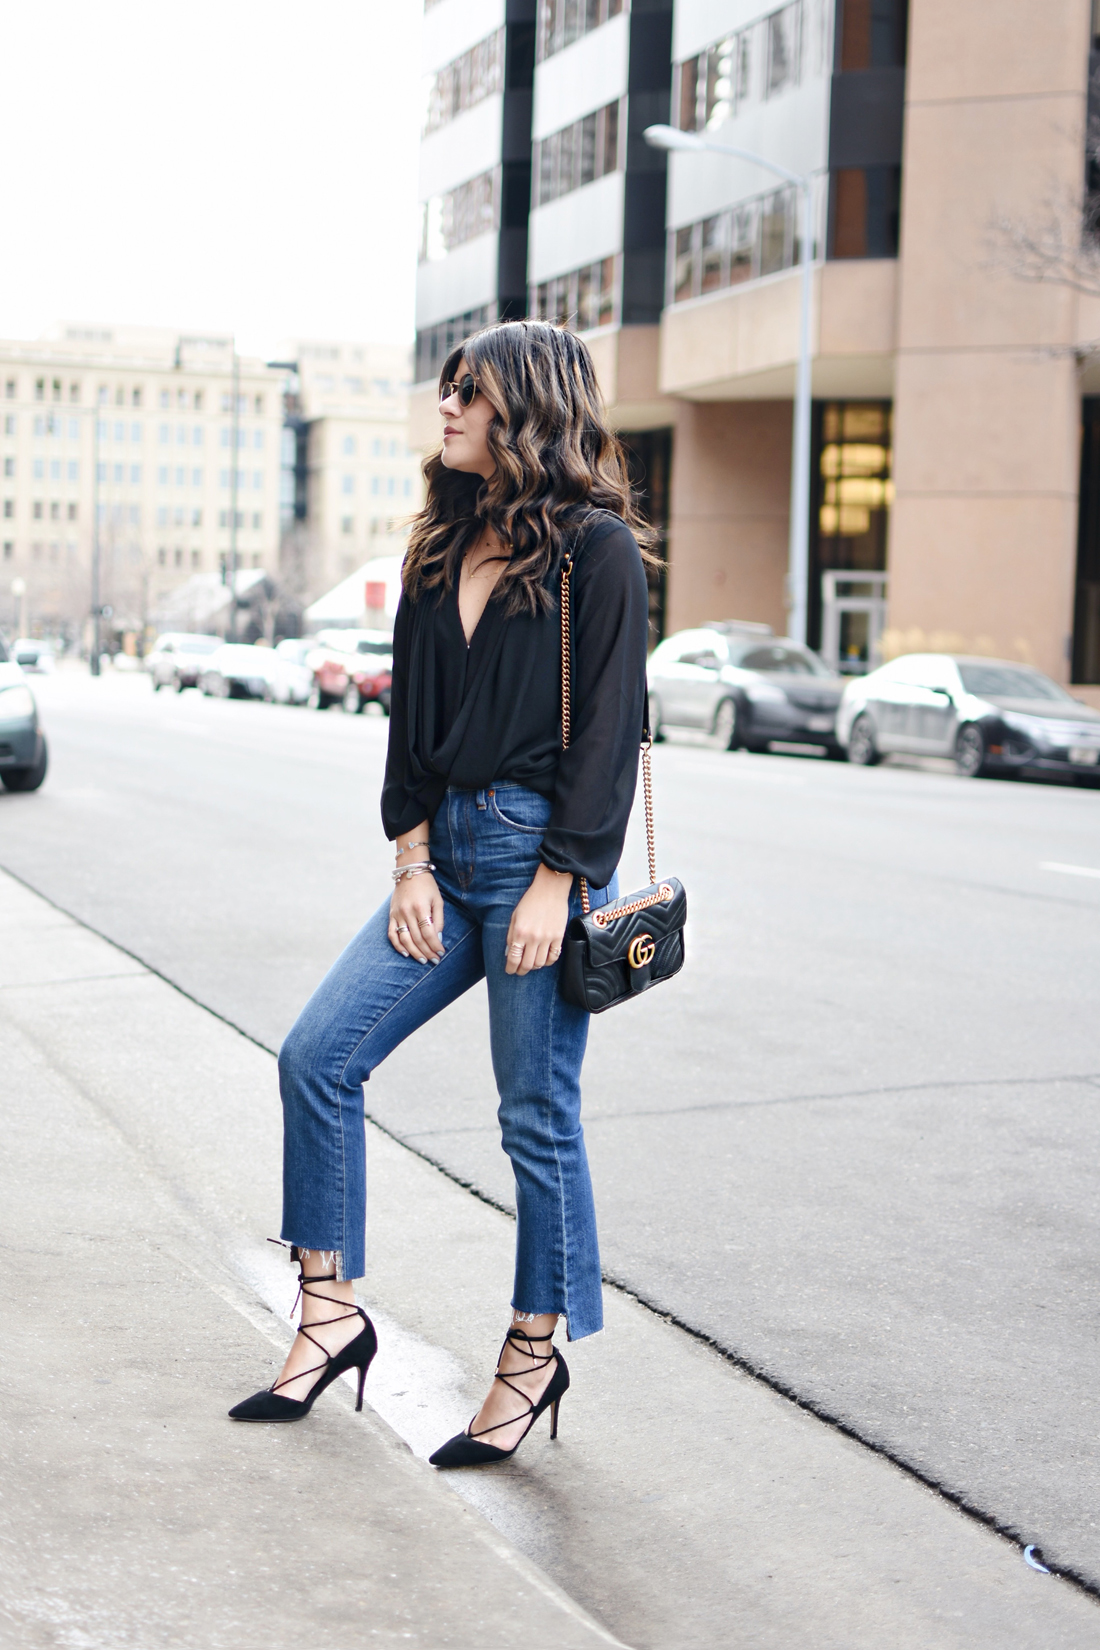 Carolina Hellal of Chic Talk wearing a Gucci Marmont bag, Madewell jeans, Forever 21 crossfront black top and Aldo black lace up pumps